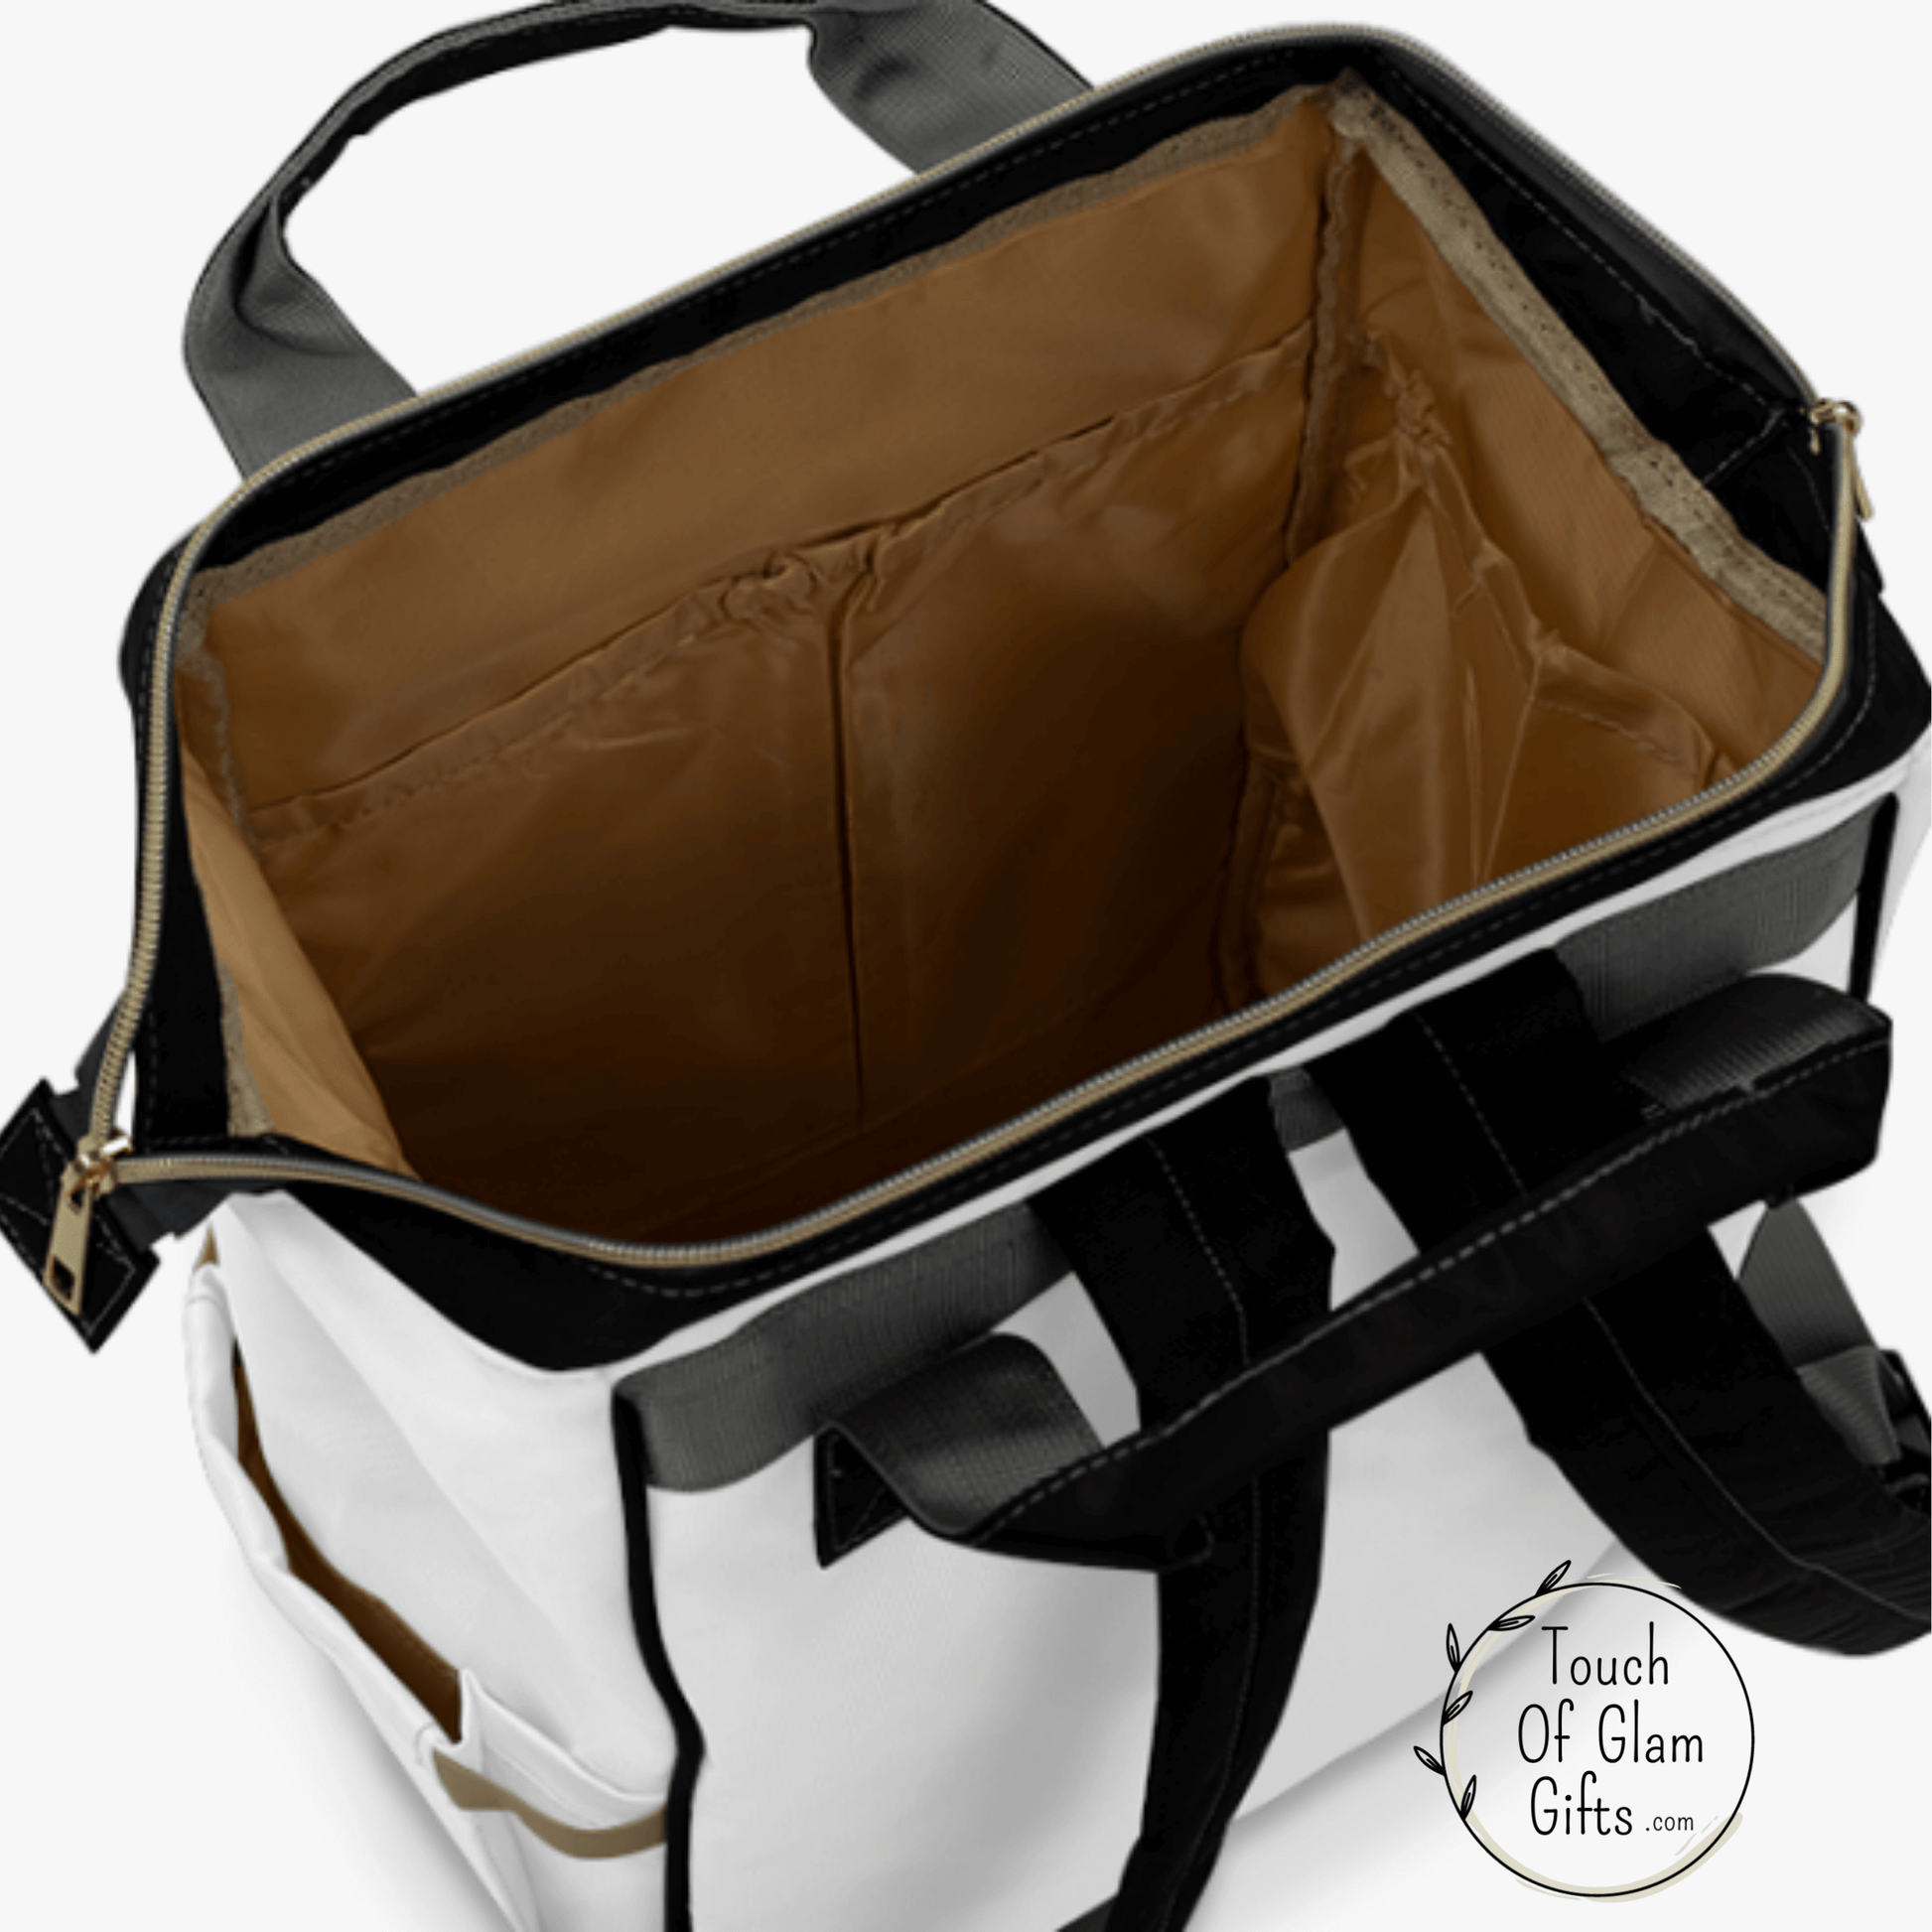 This diaper bag backpack stands up on its own when up zippered. The inside is tan color and can be spot washed with a washcloth.